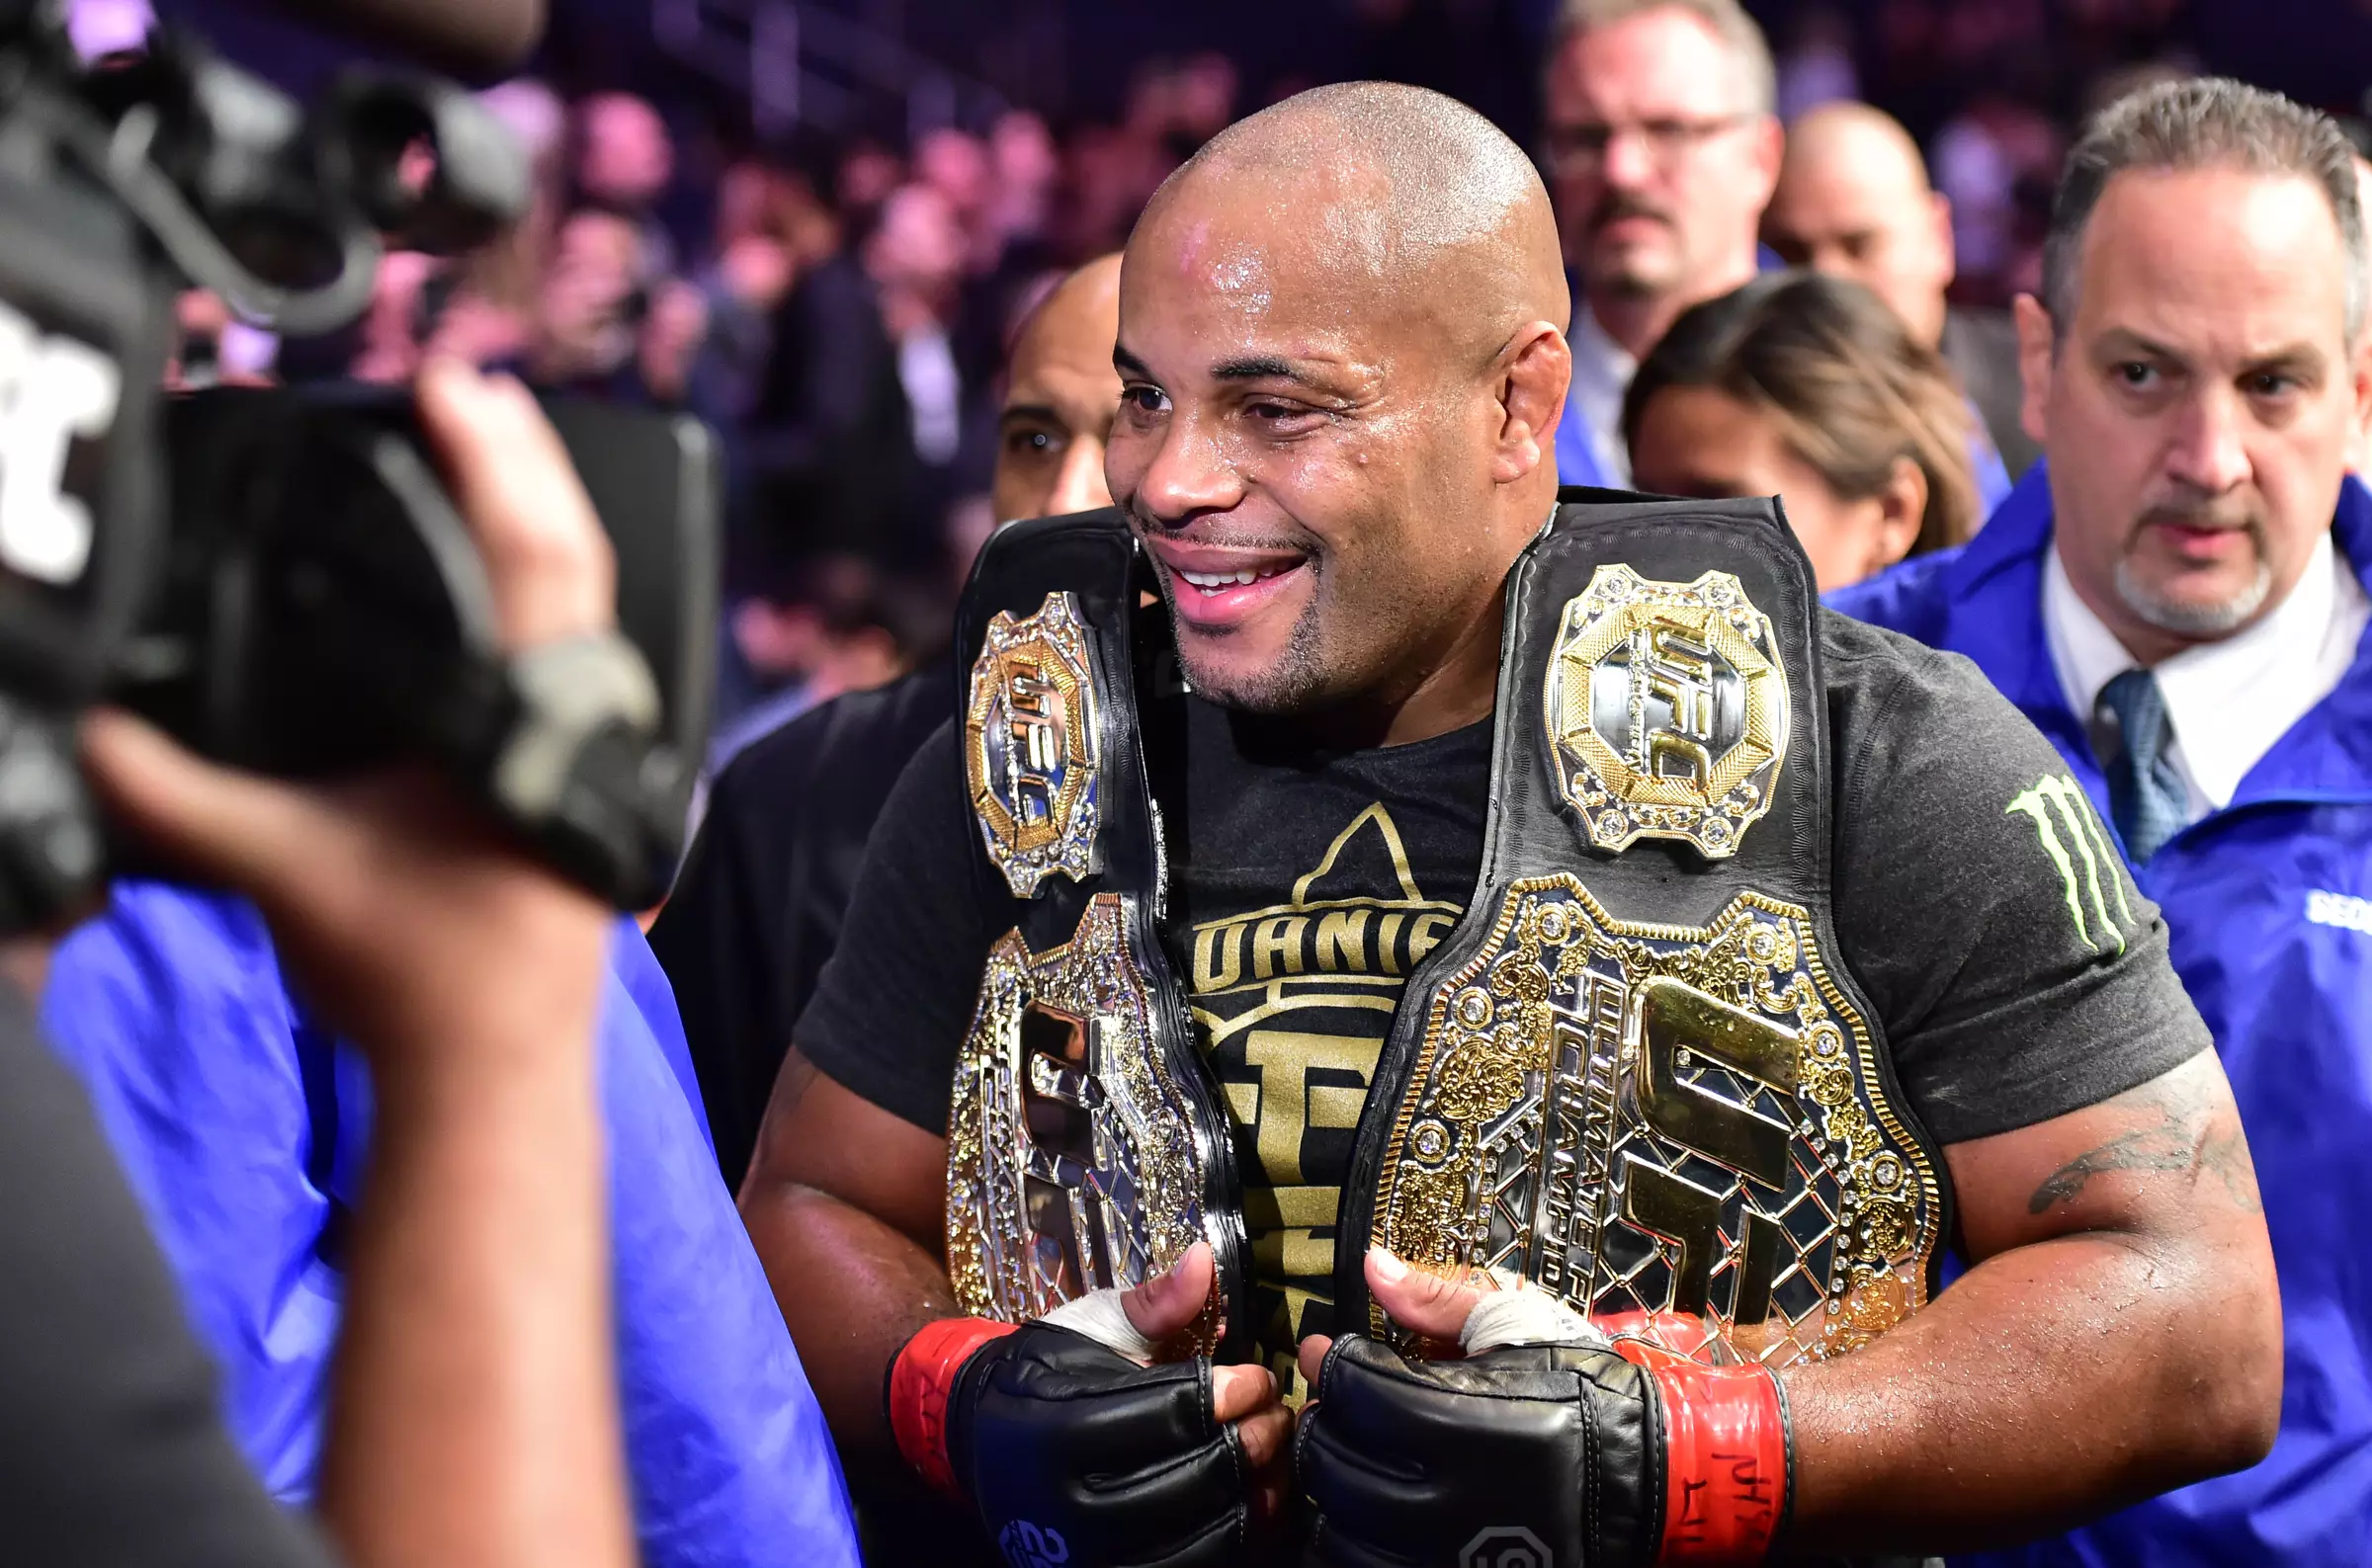 Daniel Cormier pictured with his light heavyweight and heavyweight belts.